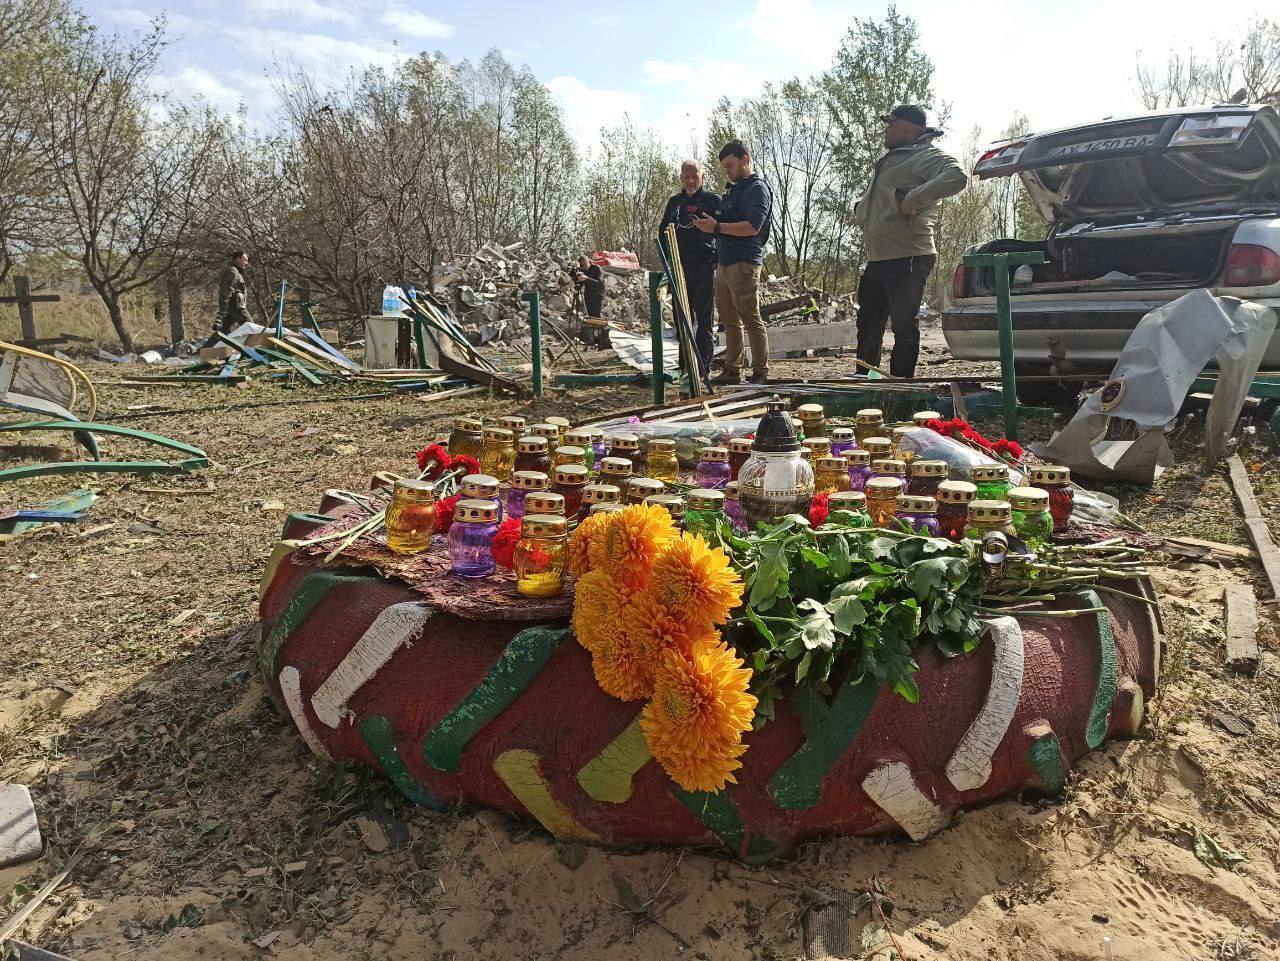 Flowers were brought to the place where people were killed.